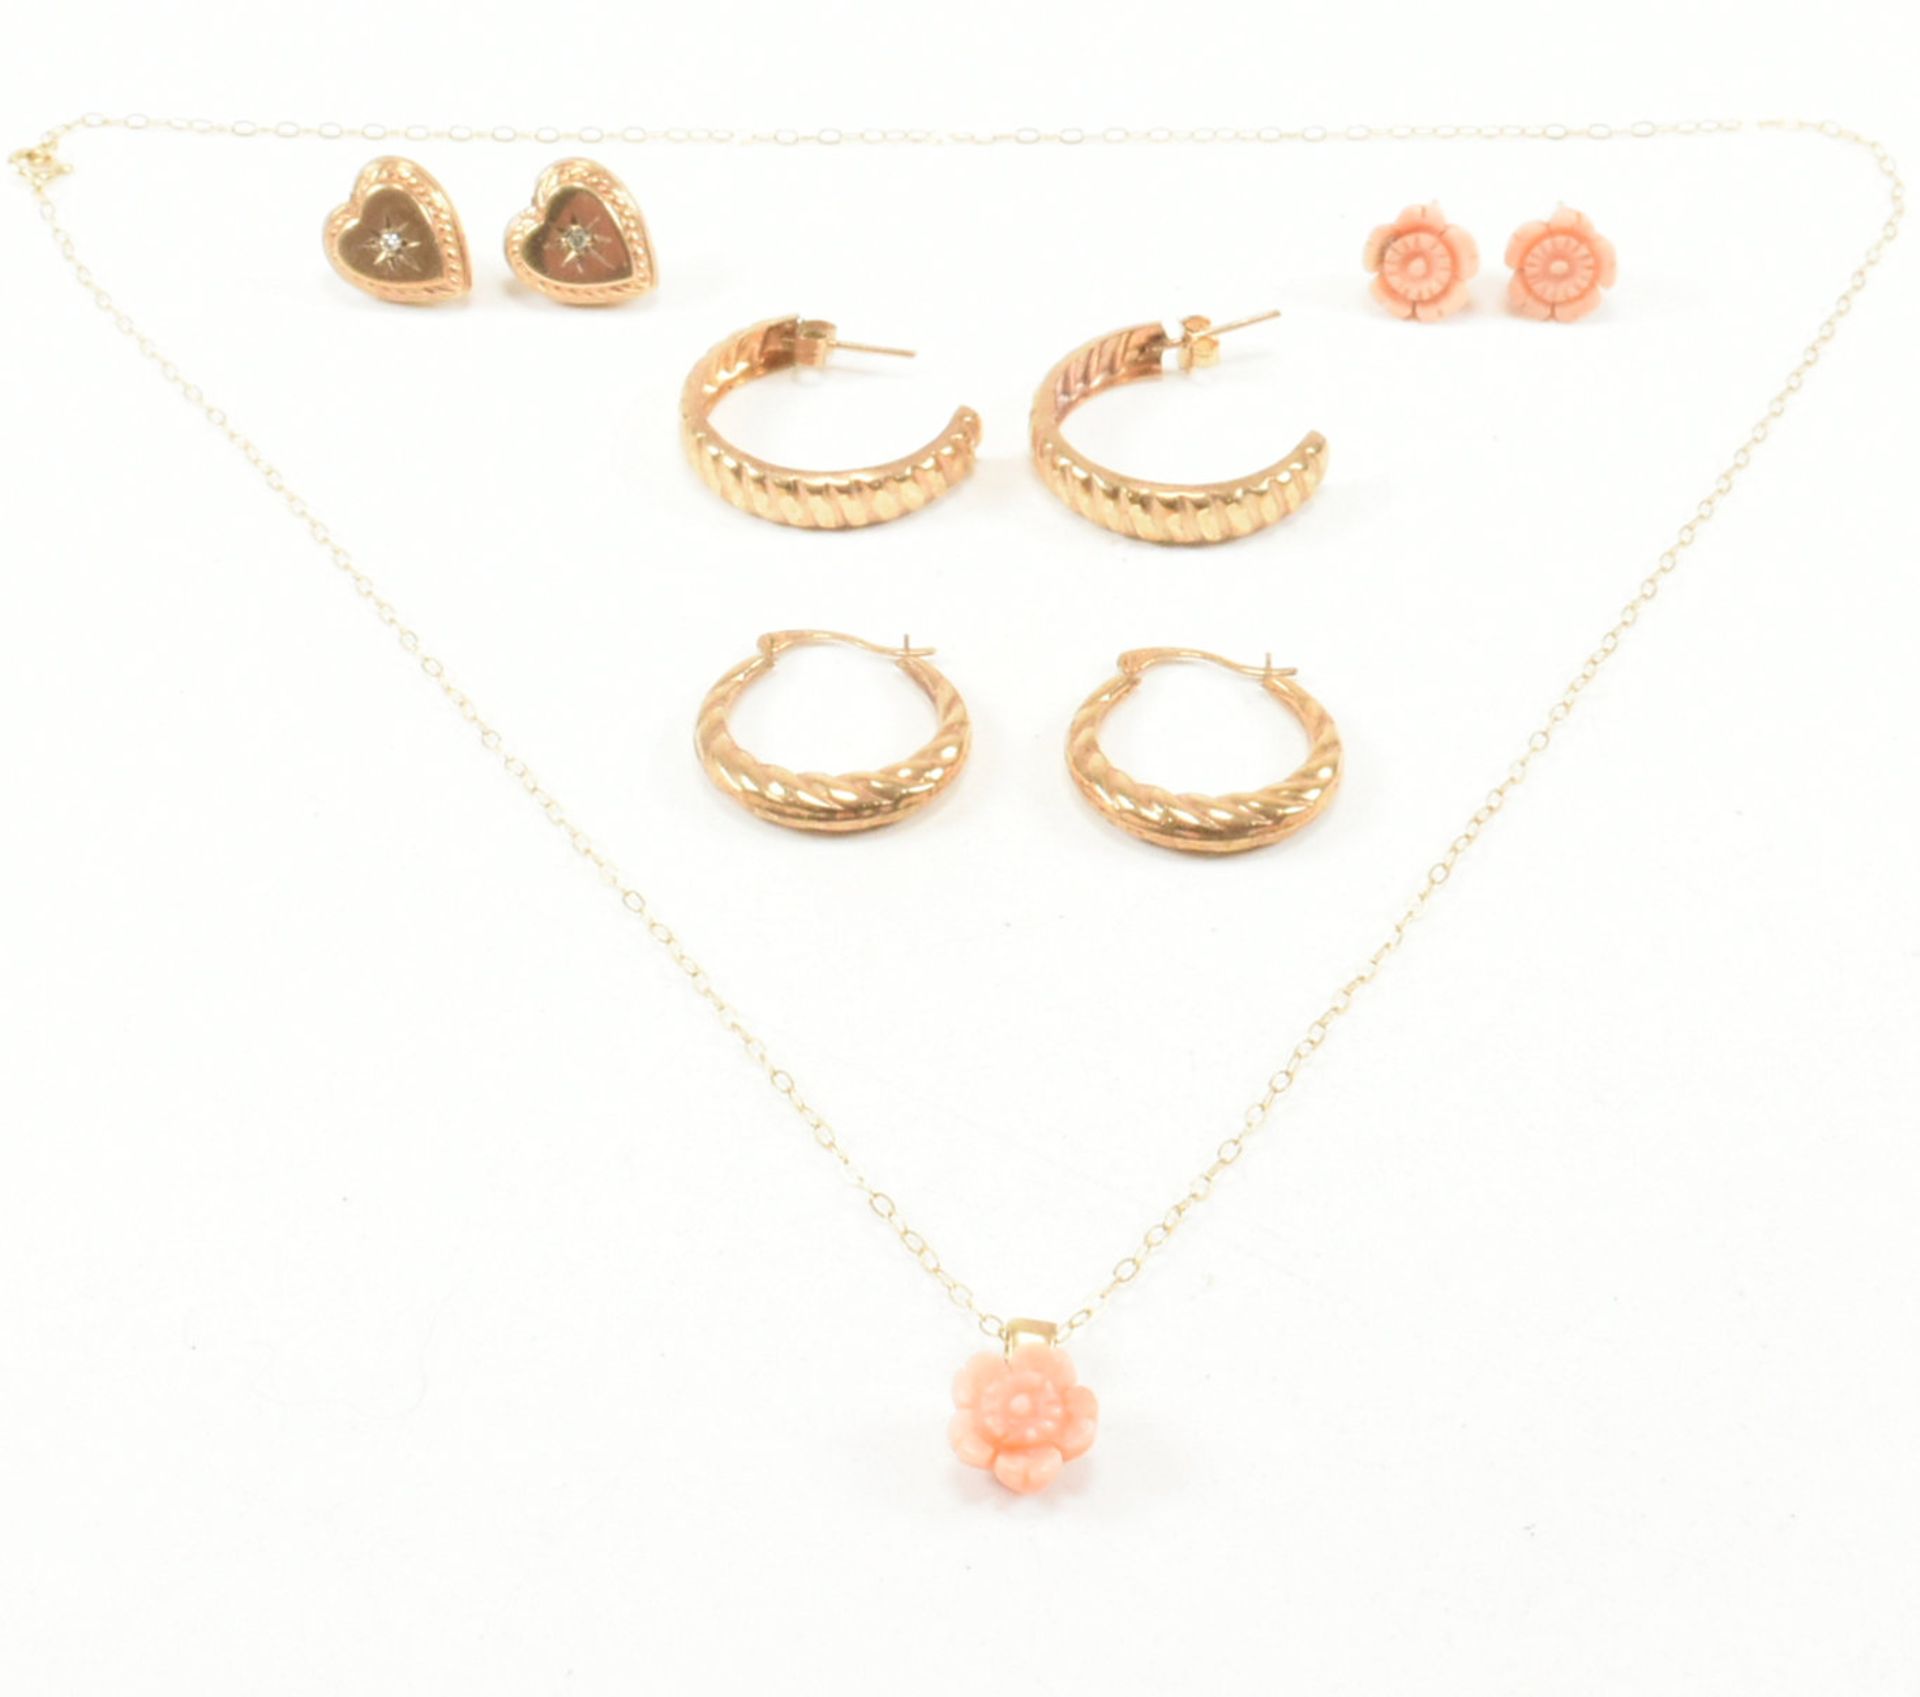 FOUR PAIRS OF 9CT GOLD EARRINGS & A 9CT GOLD PENDANT NECKLACE - Image 2 of 8